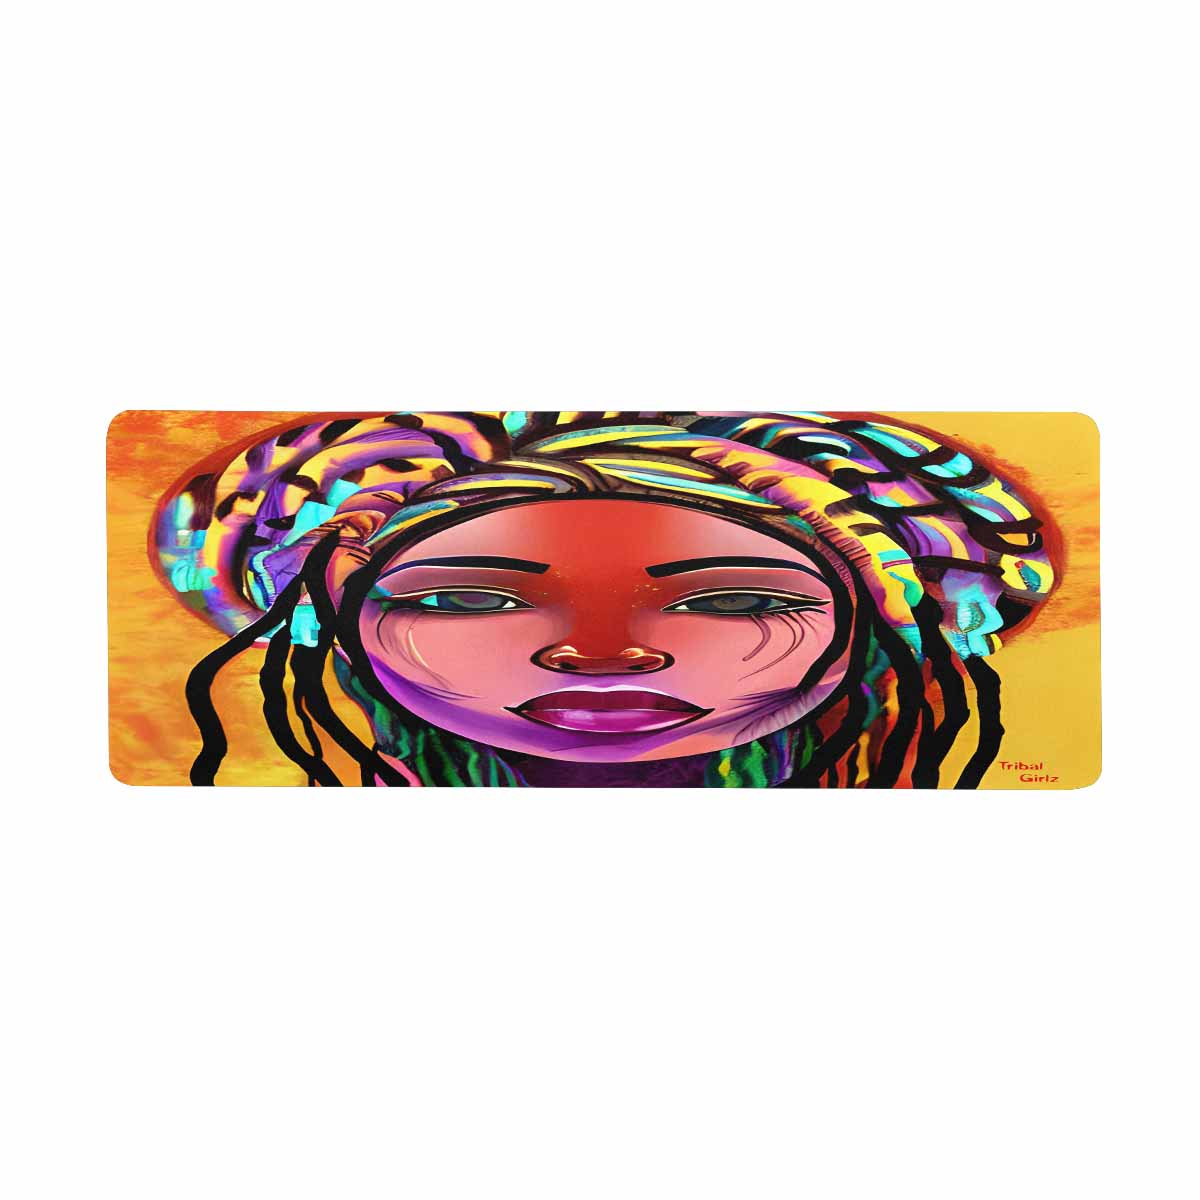 Dreads & Braids, 31 x 12 in large mouse pad, Fulangiara 22